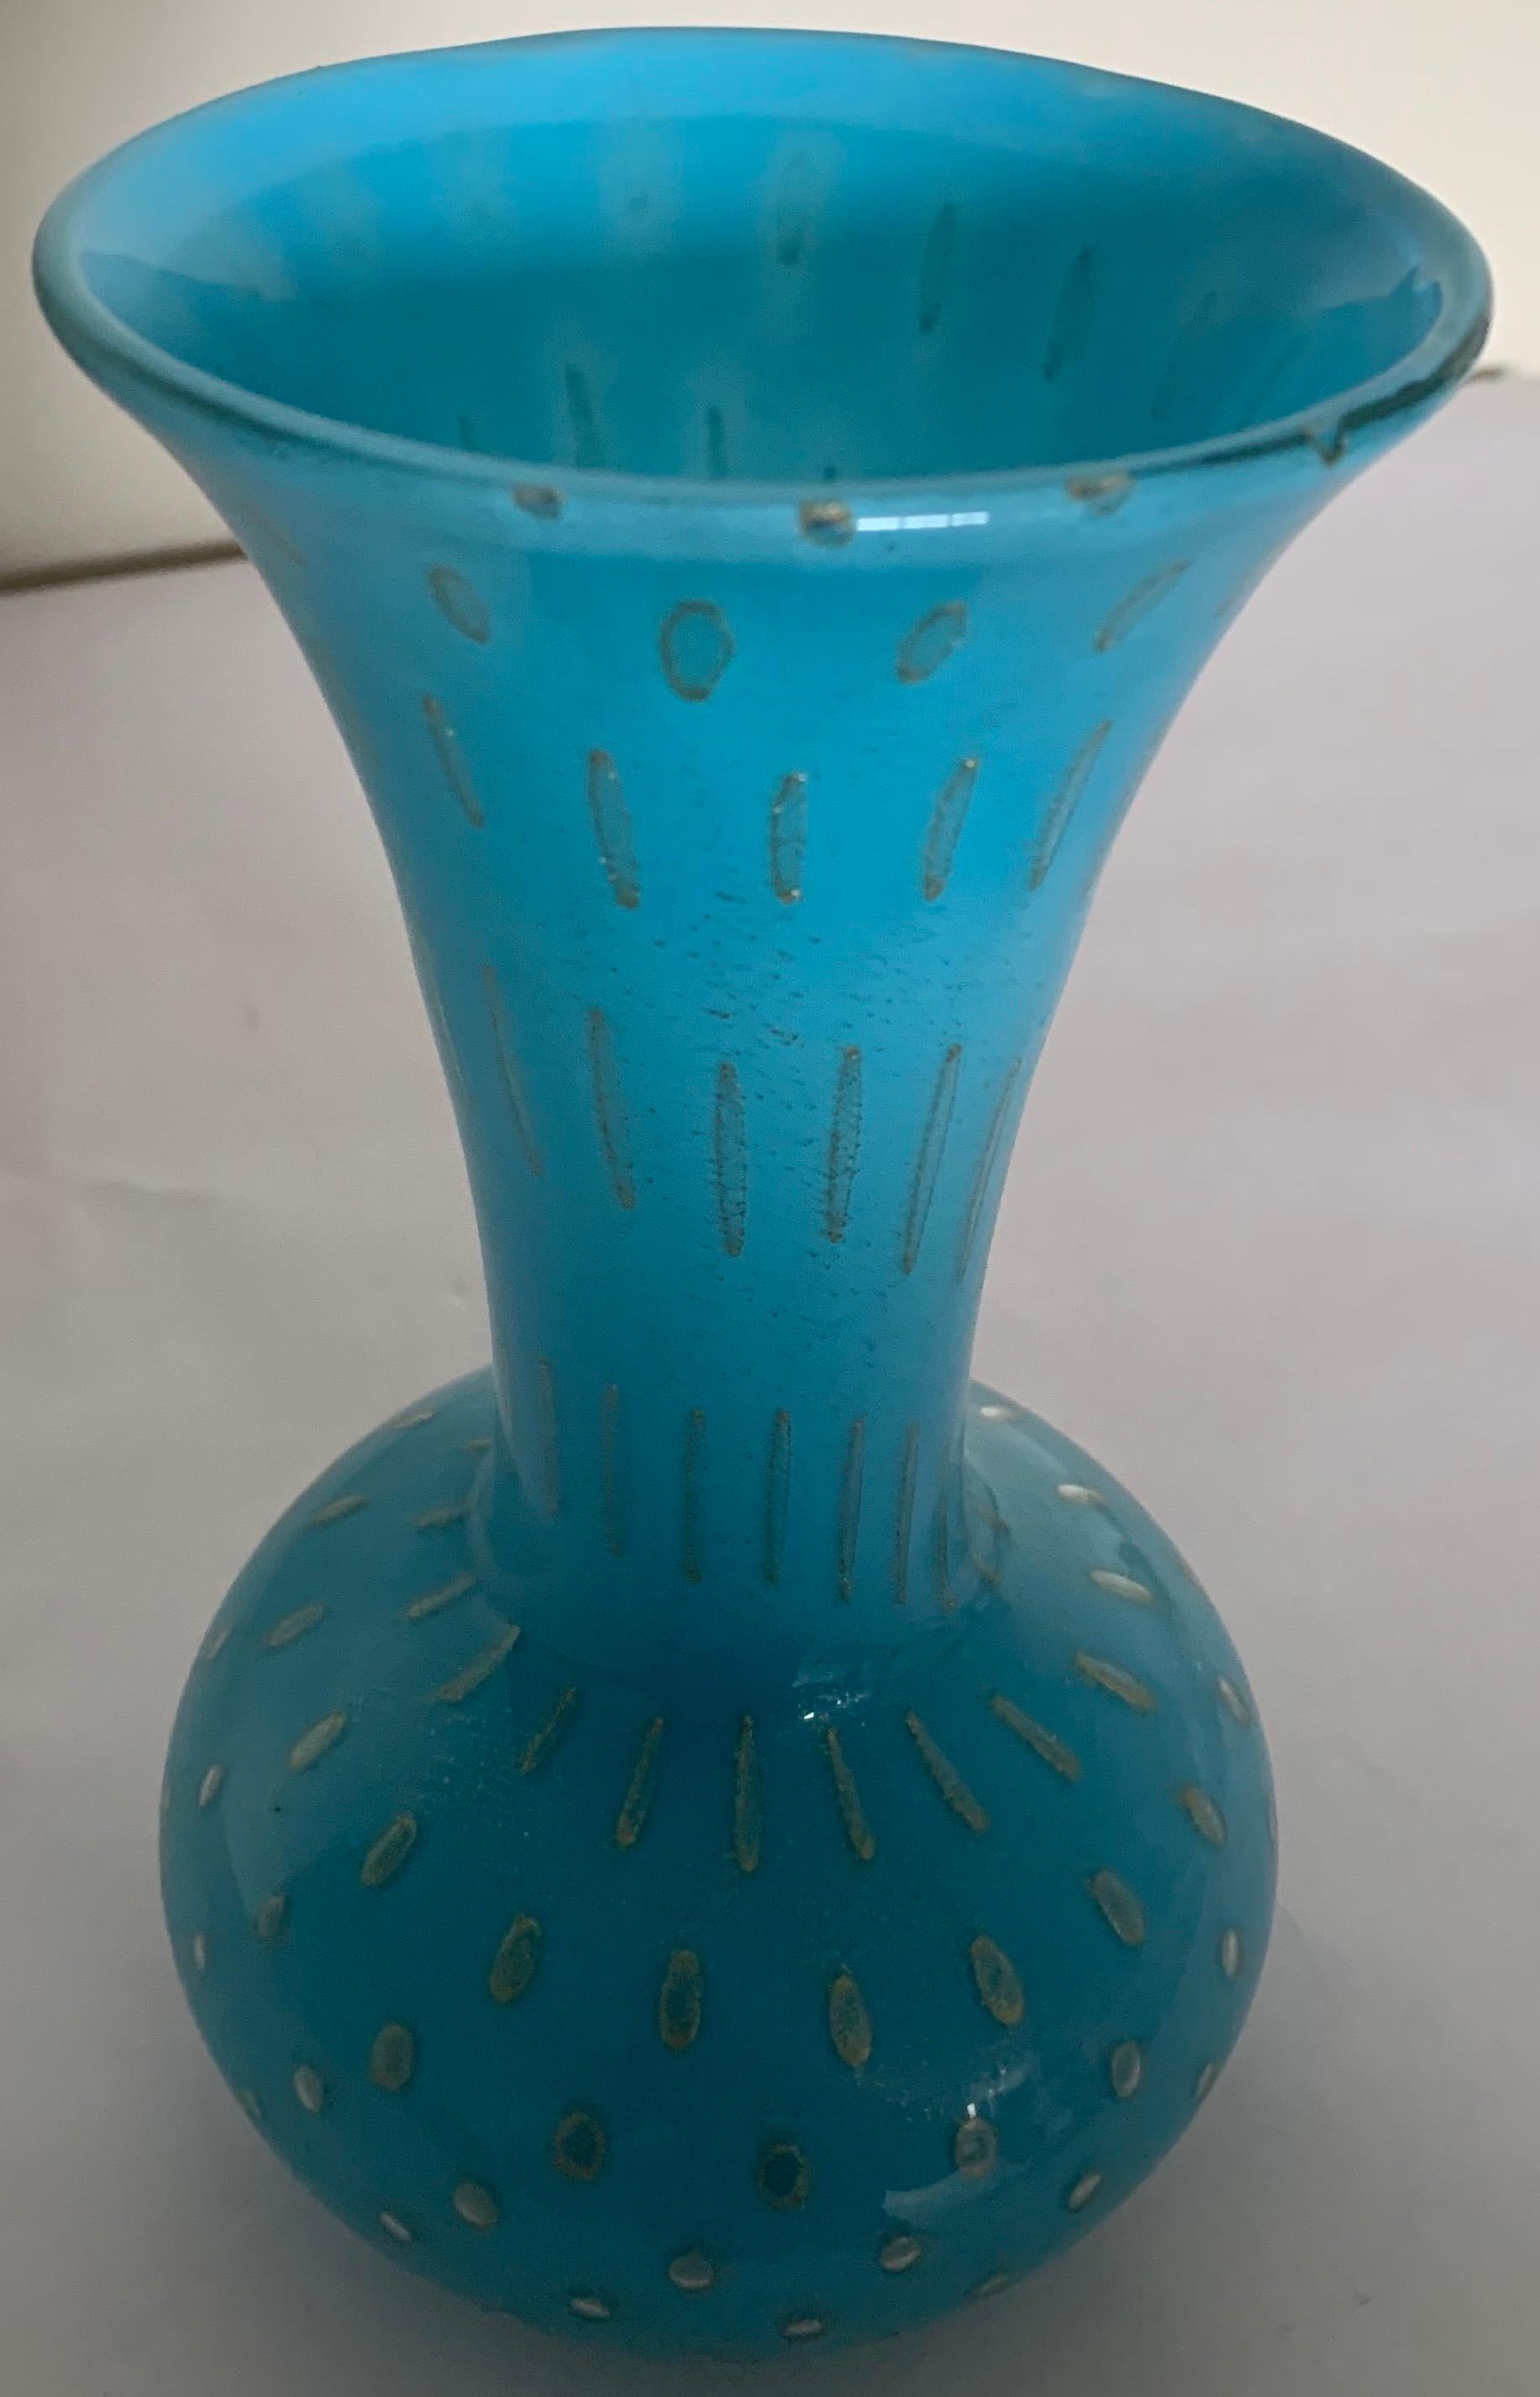 Murano Barbini Robins Egg Blue Glass Vase In Good Condition For Sale In Stamford, CT